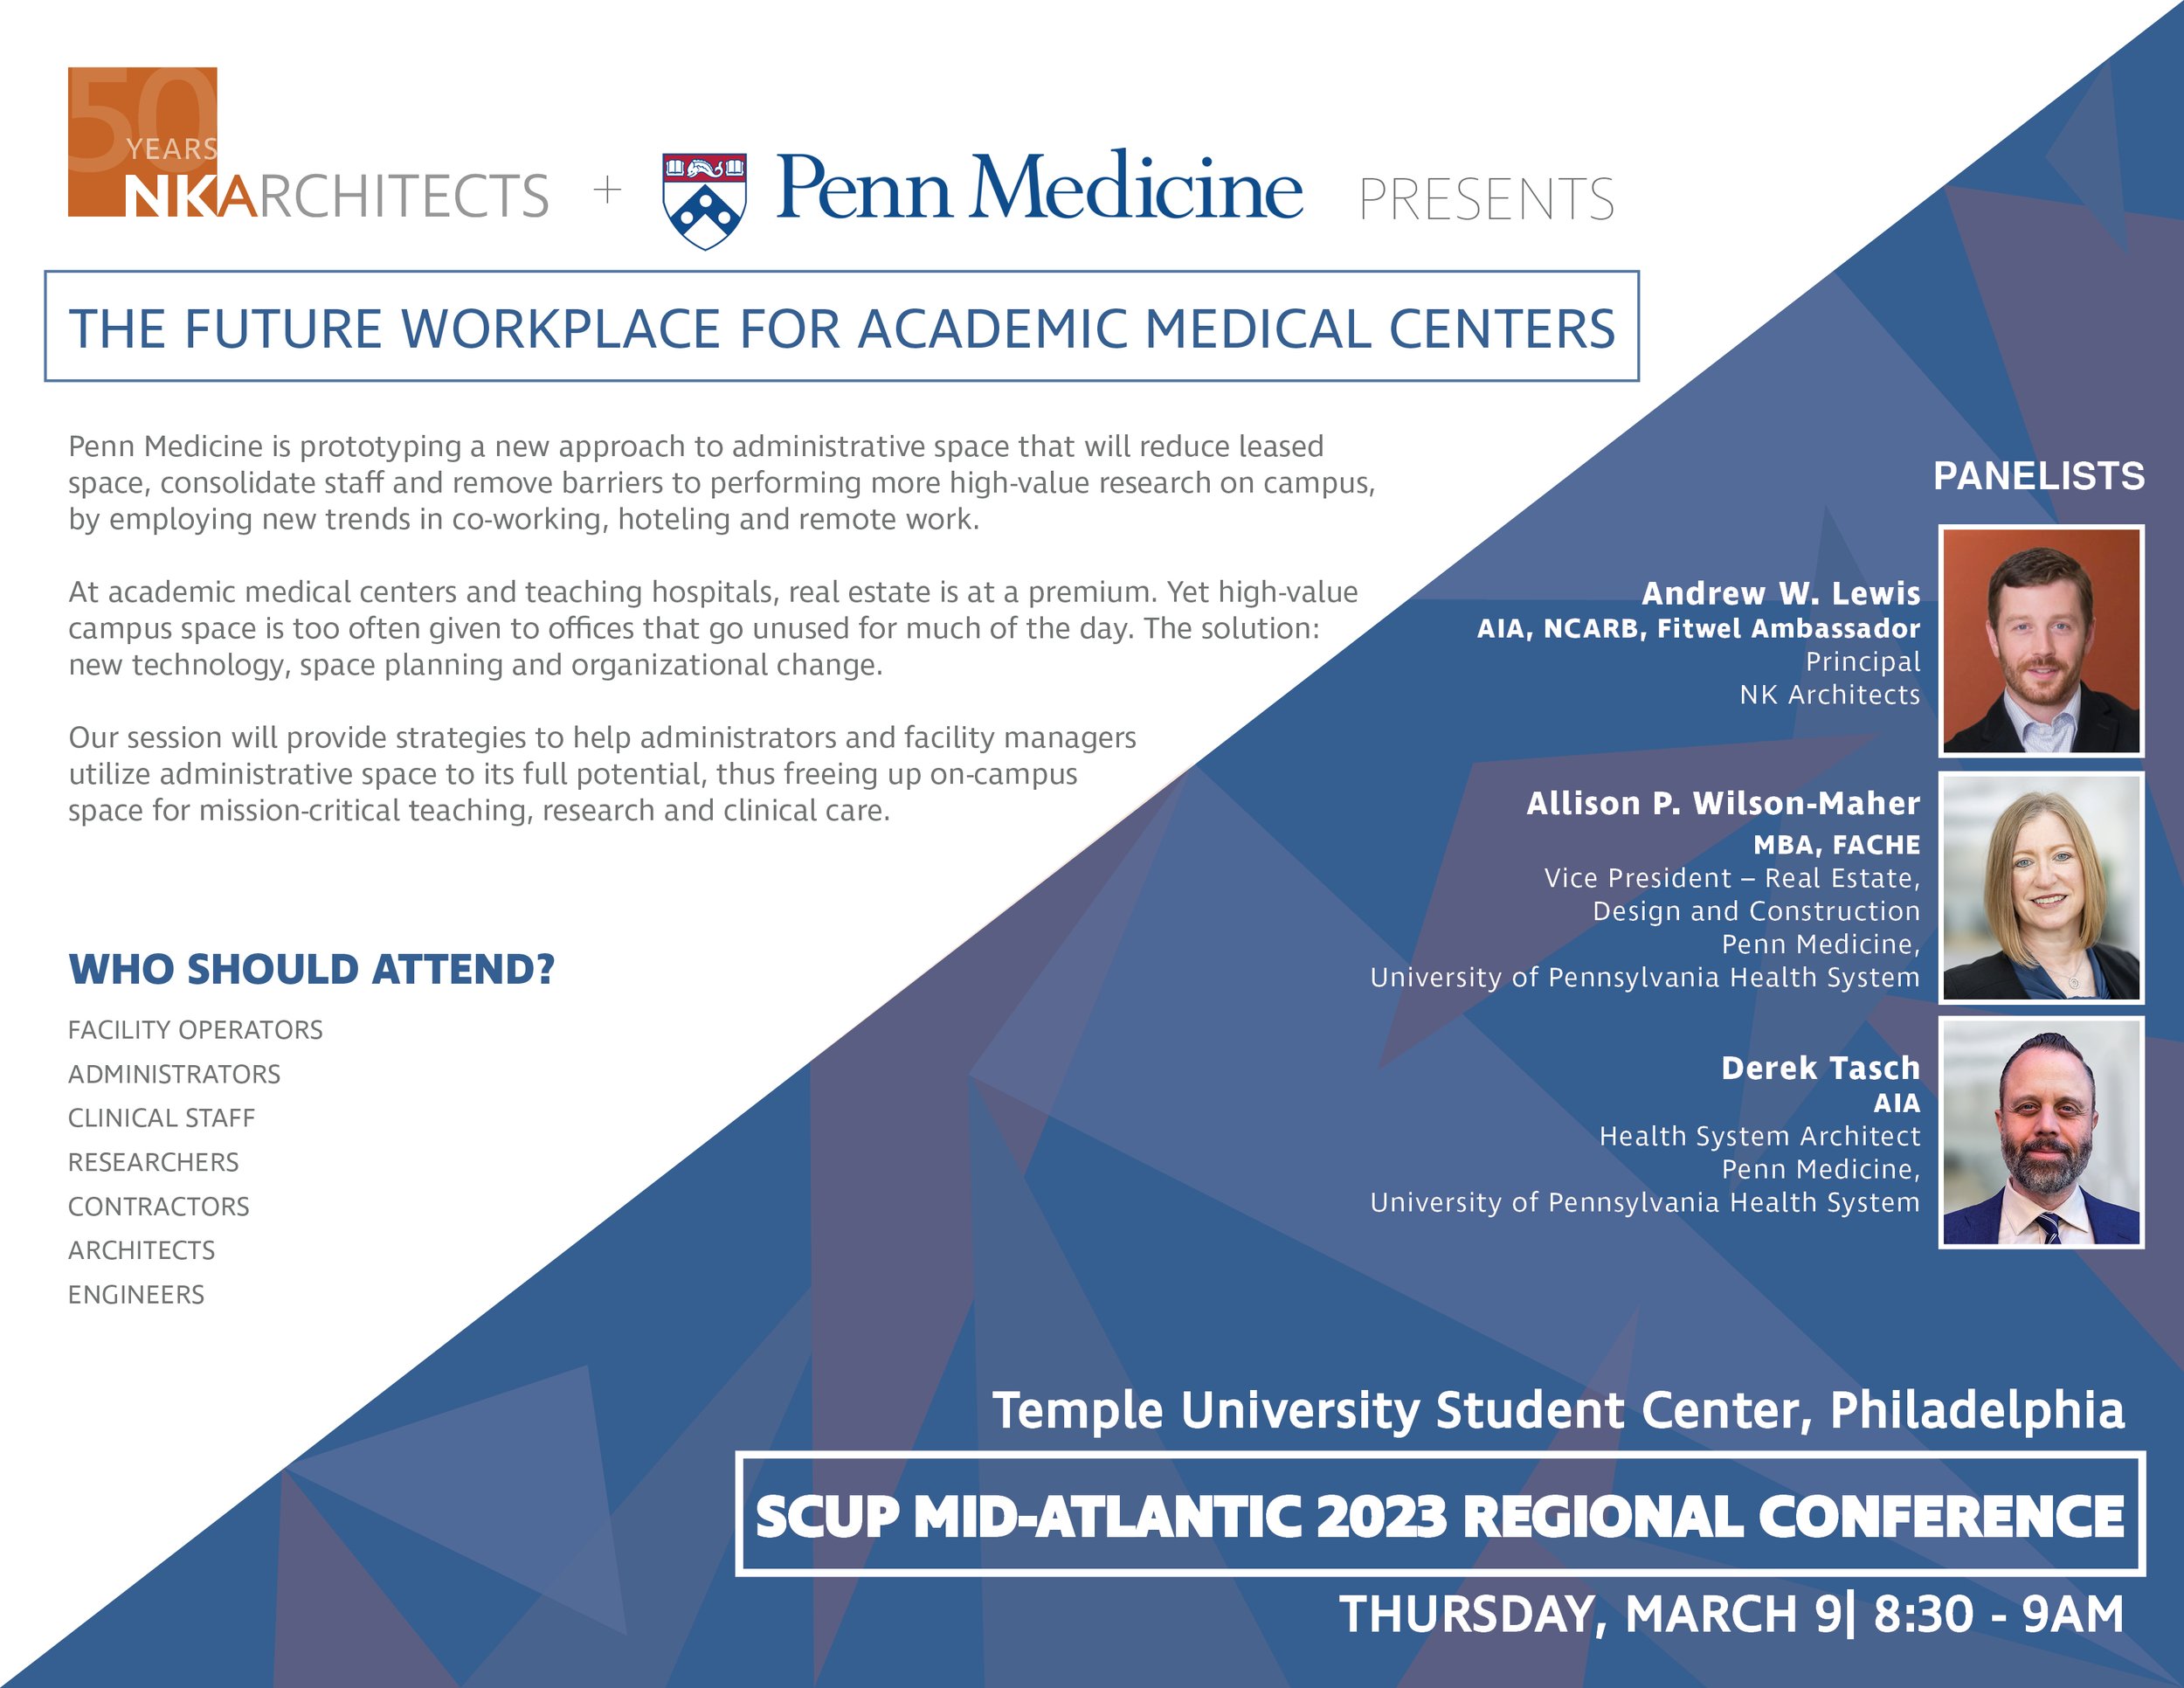 NK and Penn Medicine Present: The Future Workplace for Academic Medical Centers